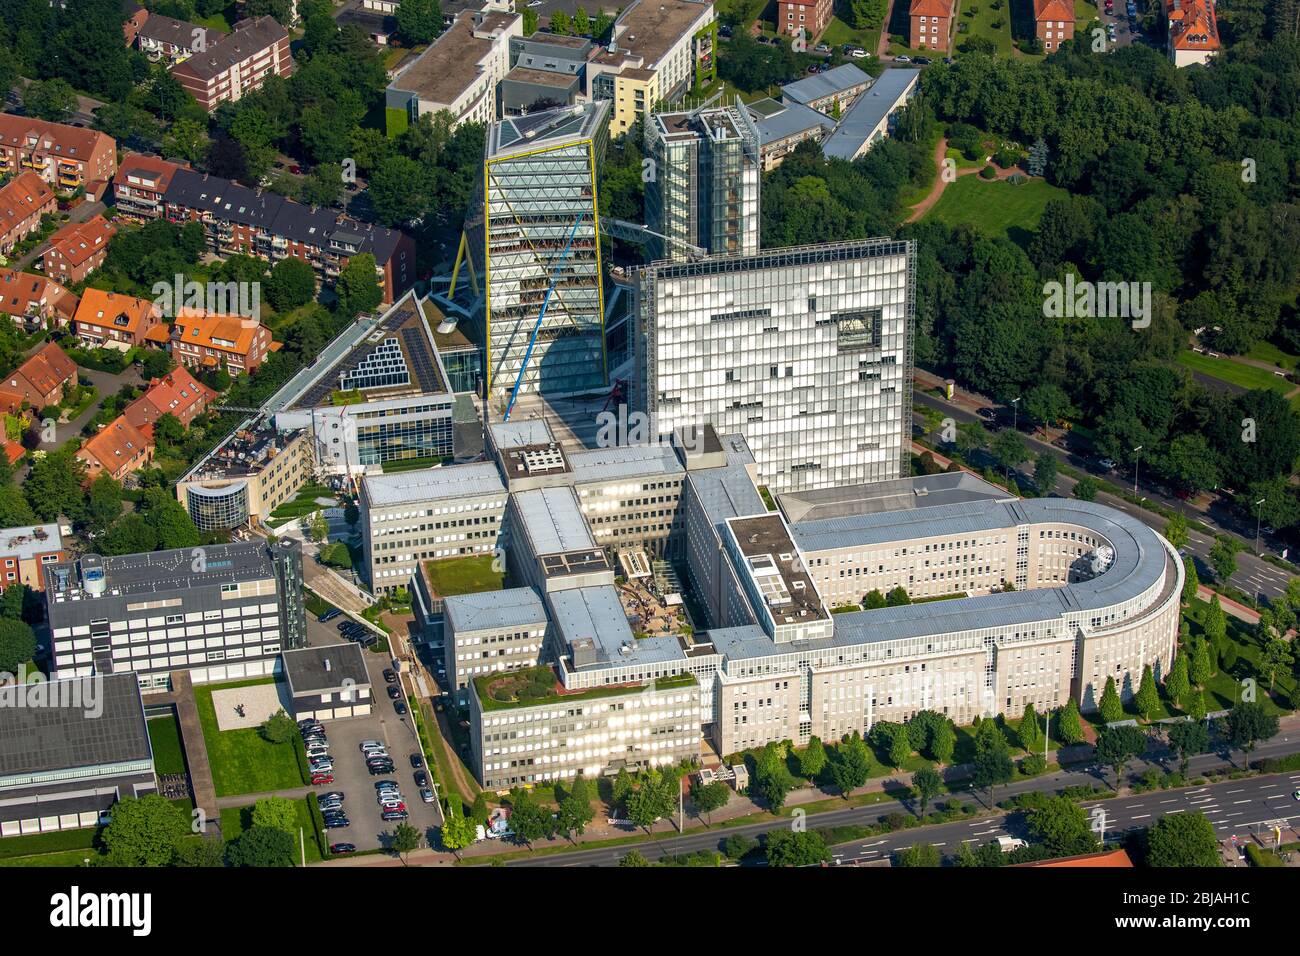 Office building of the administrative and business center of the LVM insurance at the Weseler street in Muenster, 07.06.2016, aerial view, Germany, North Rhine-Westphalia, Munster Stock Photo